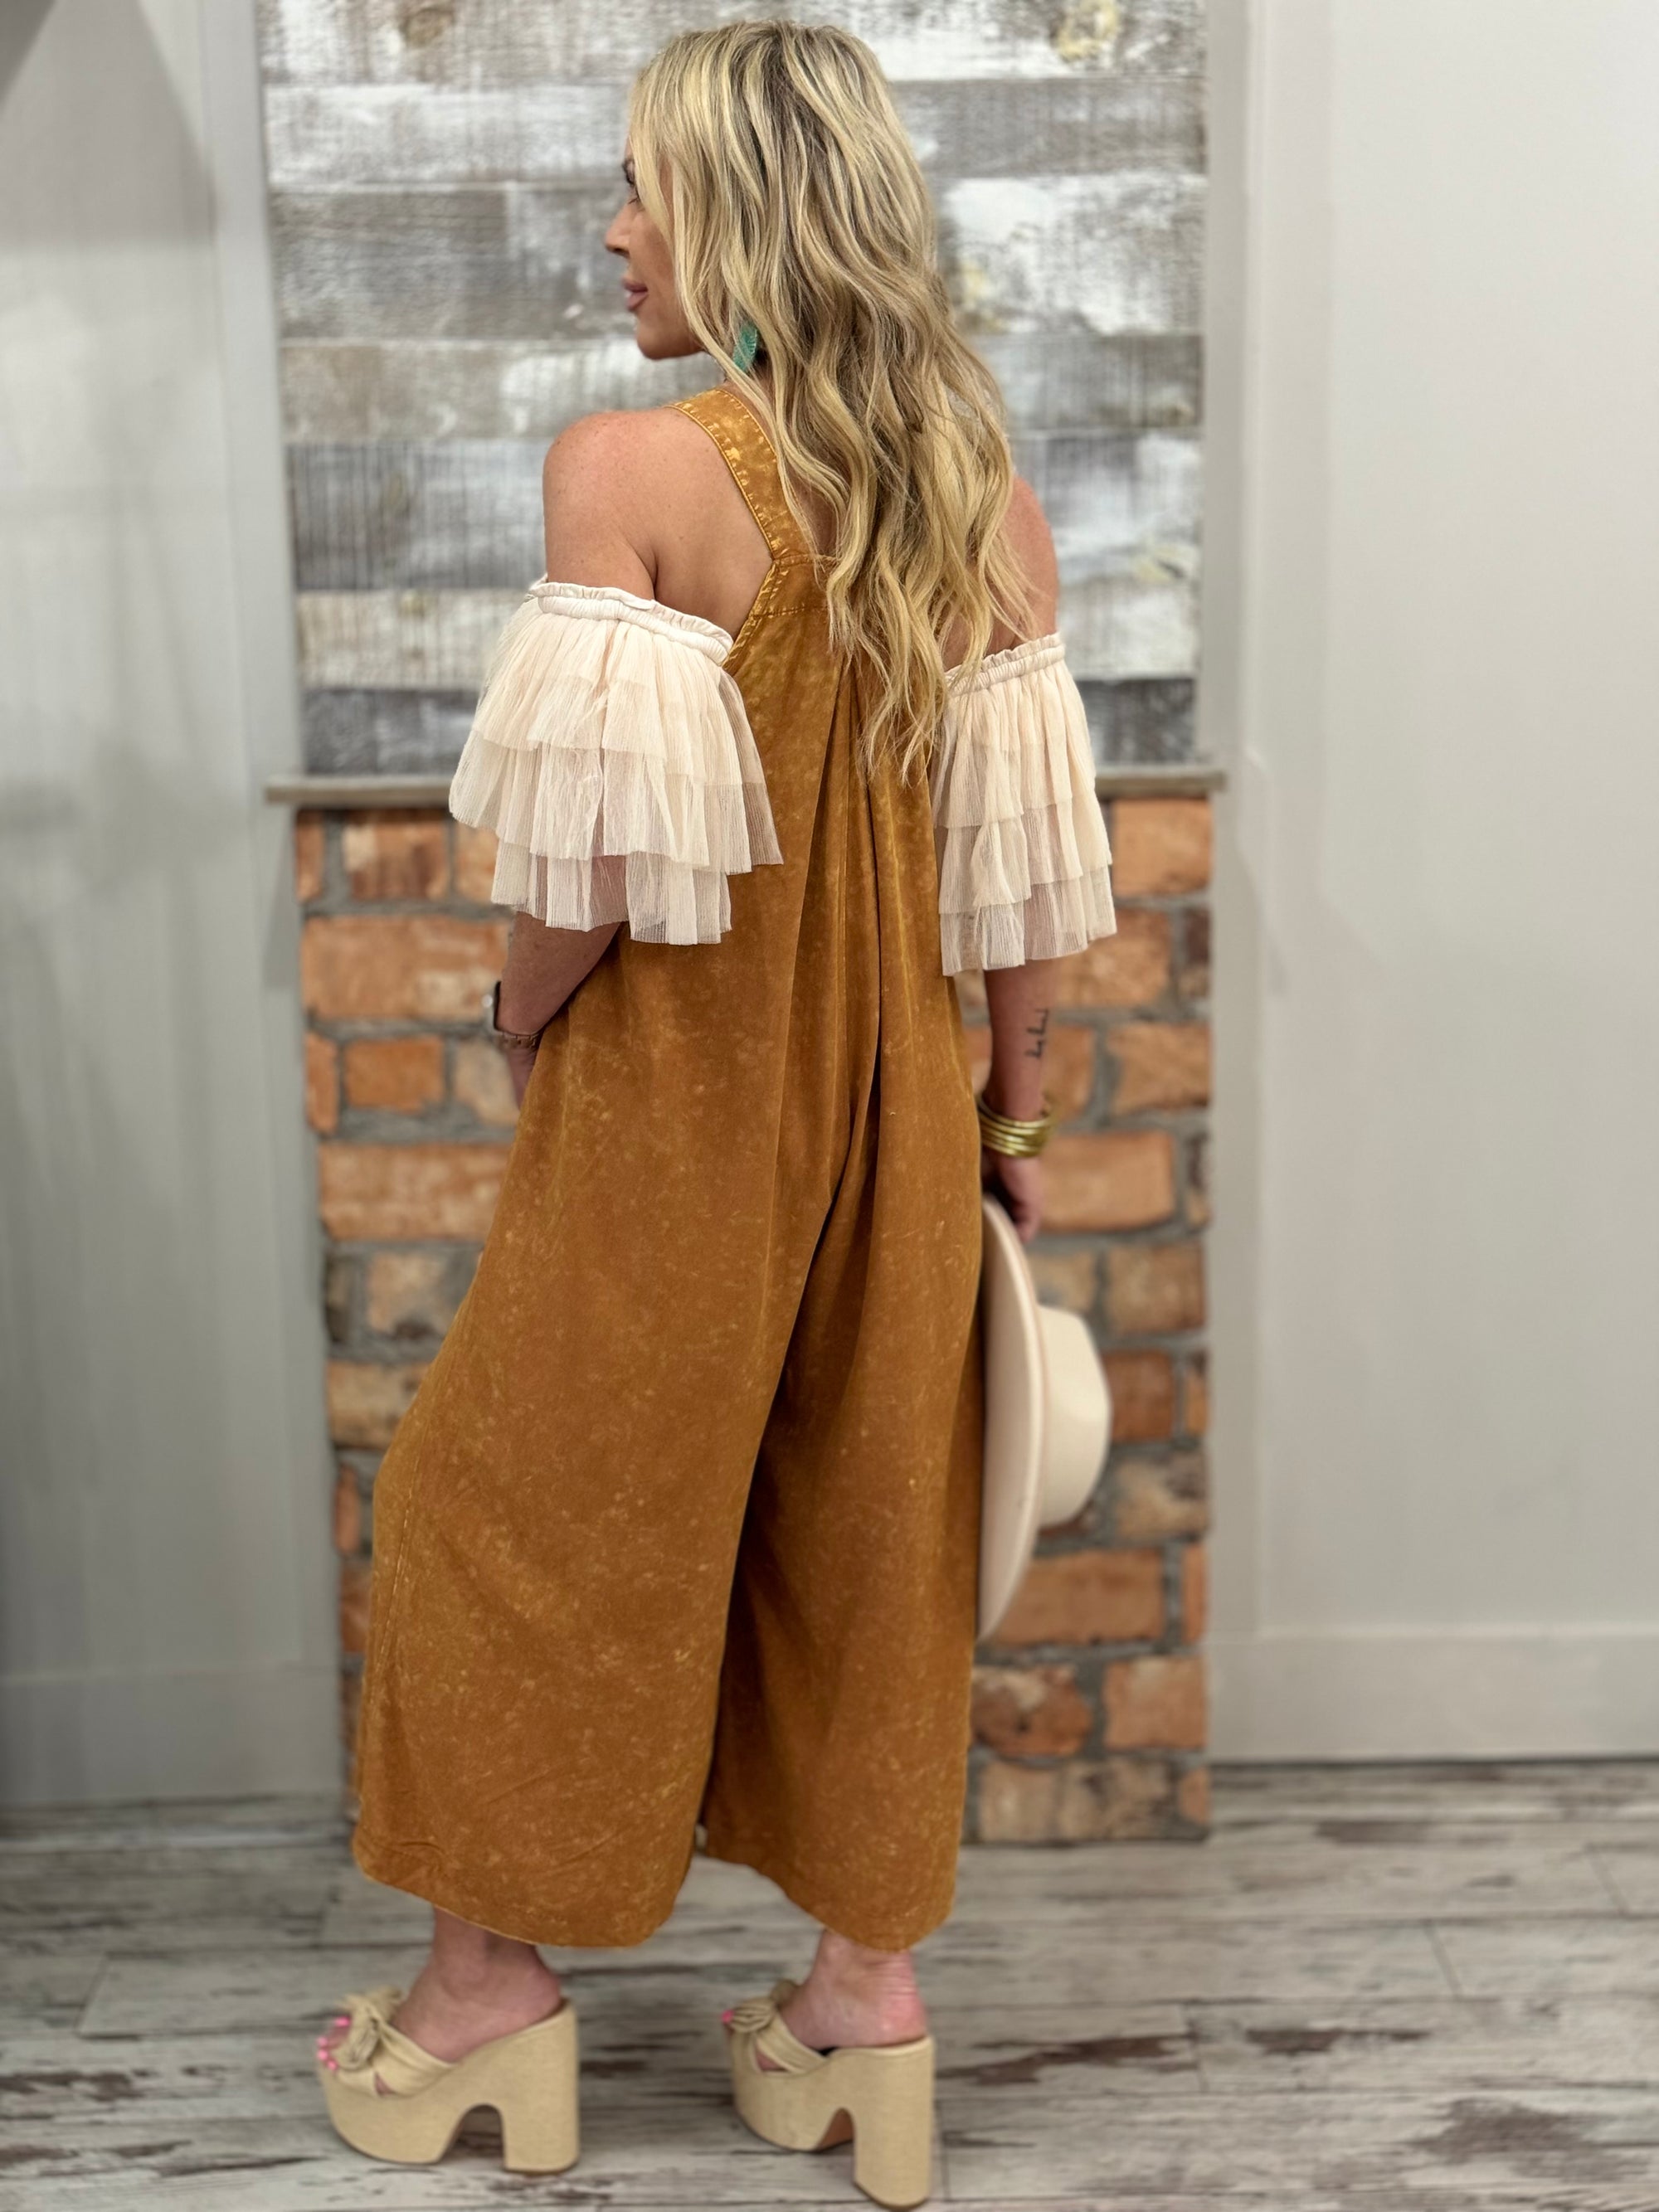 Washed Overall Jumpsuit in Camel